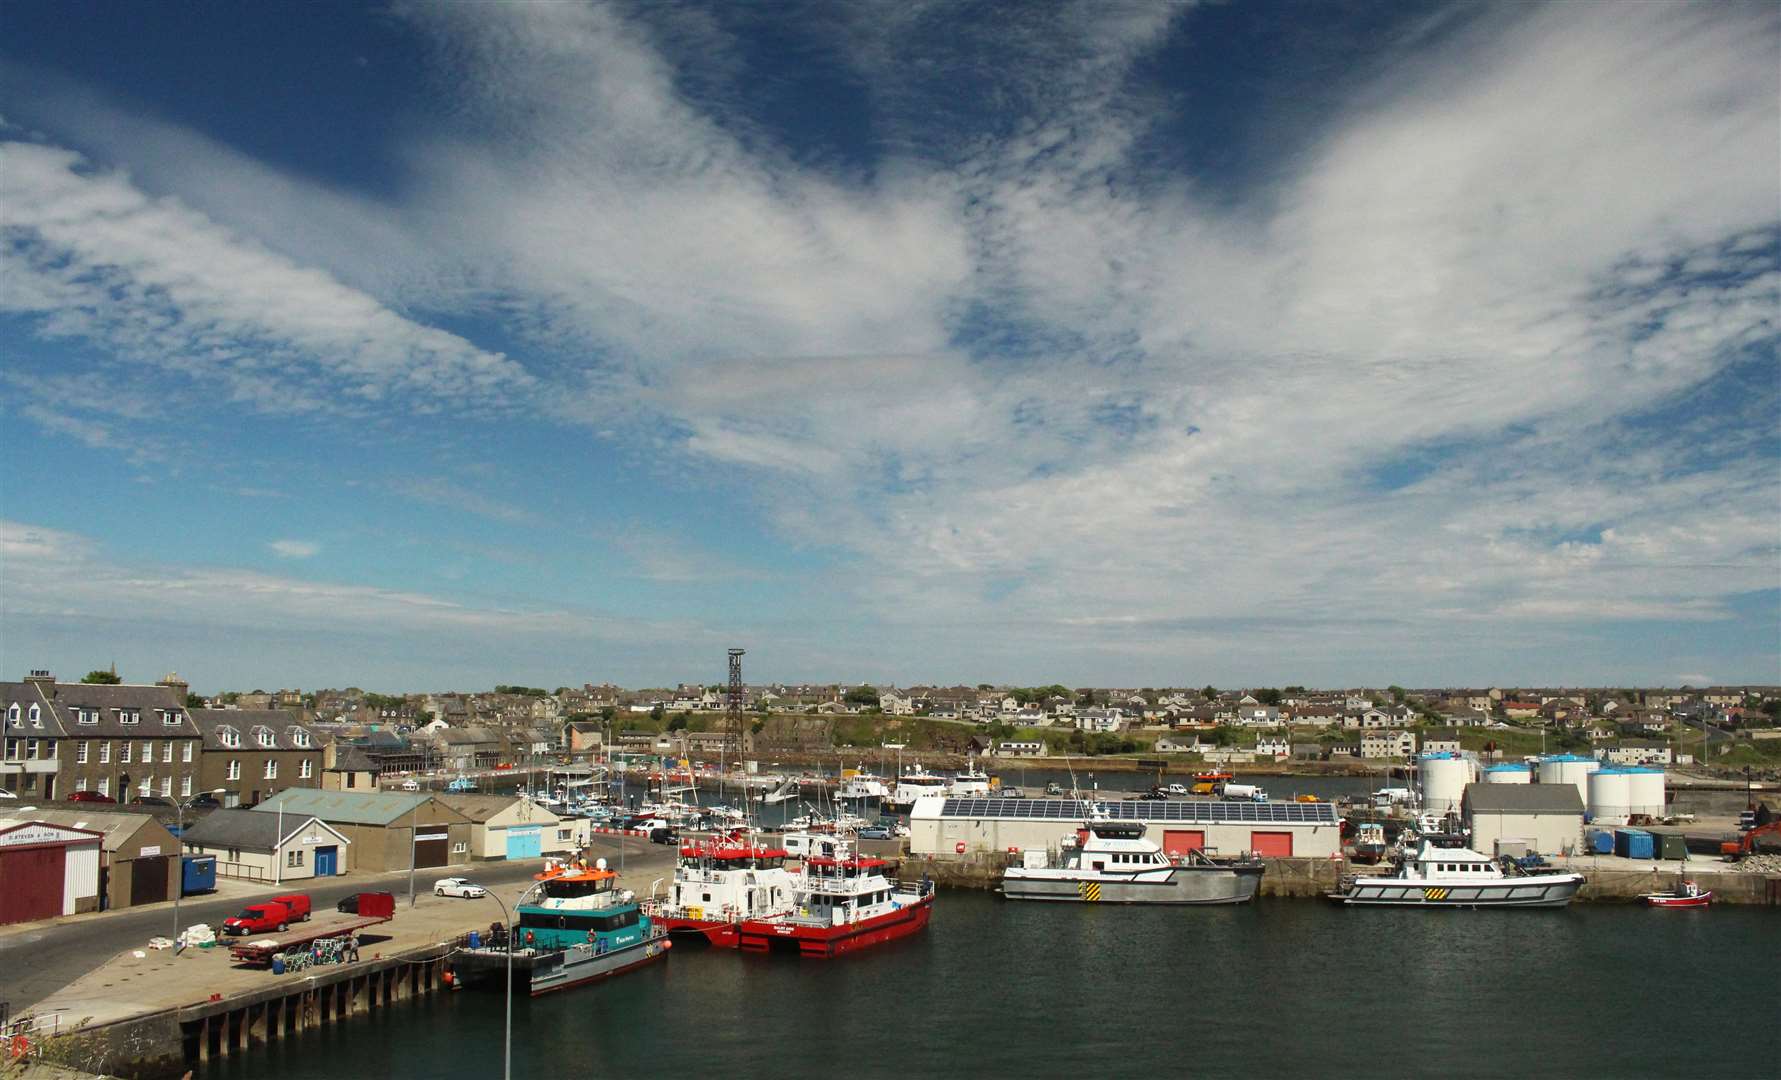 There was positive feedback about Wick harbour, which is seen to be thriving.